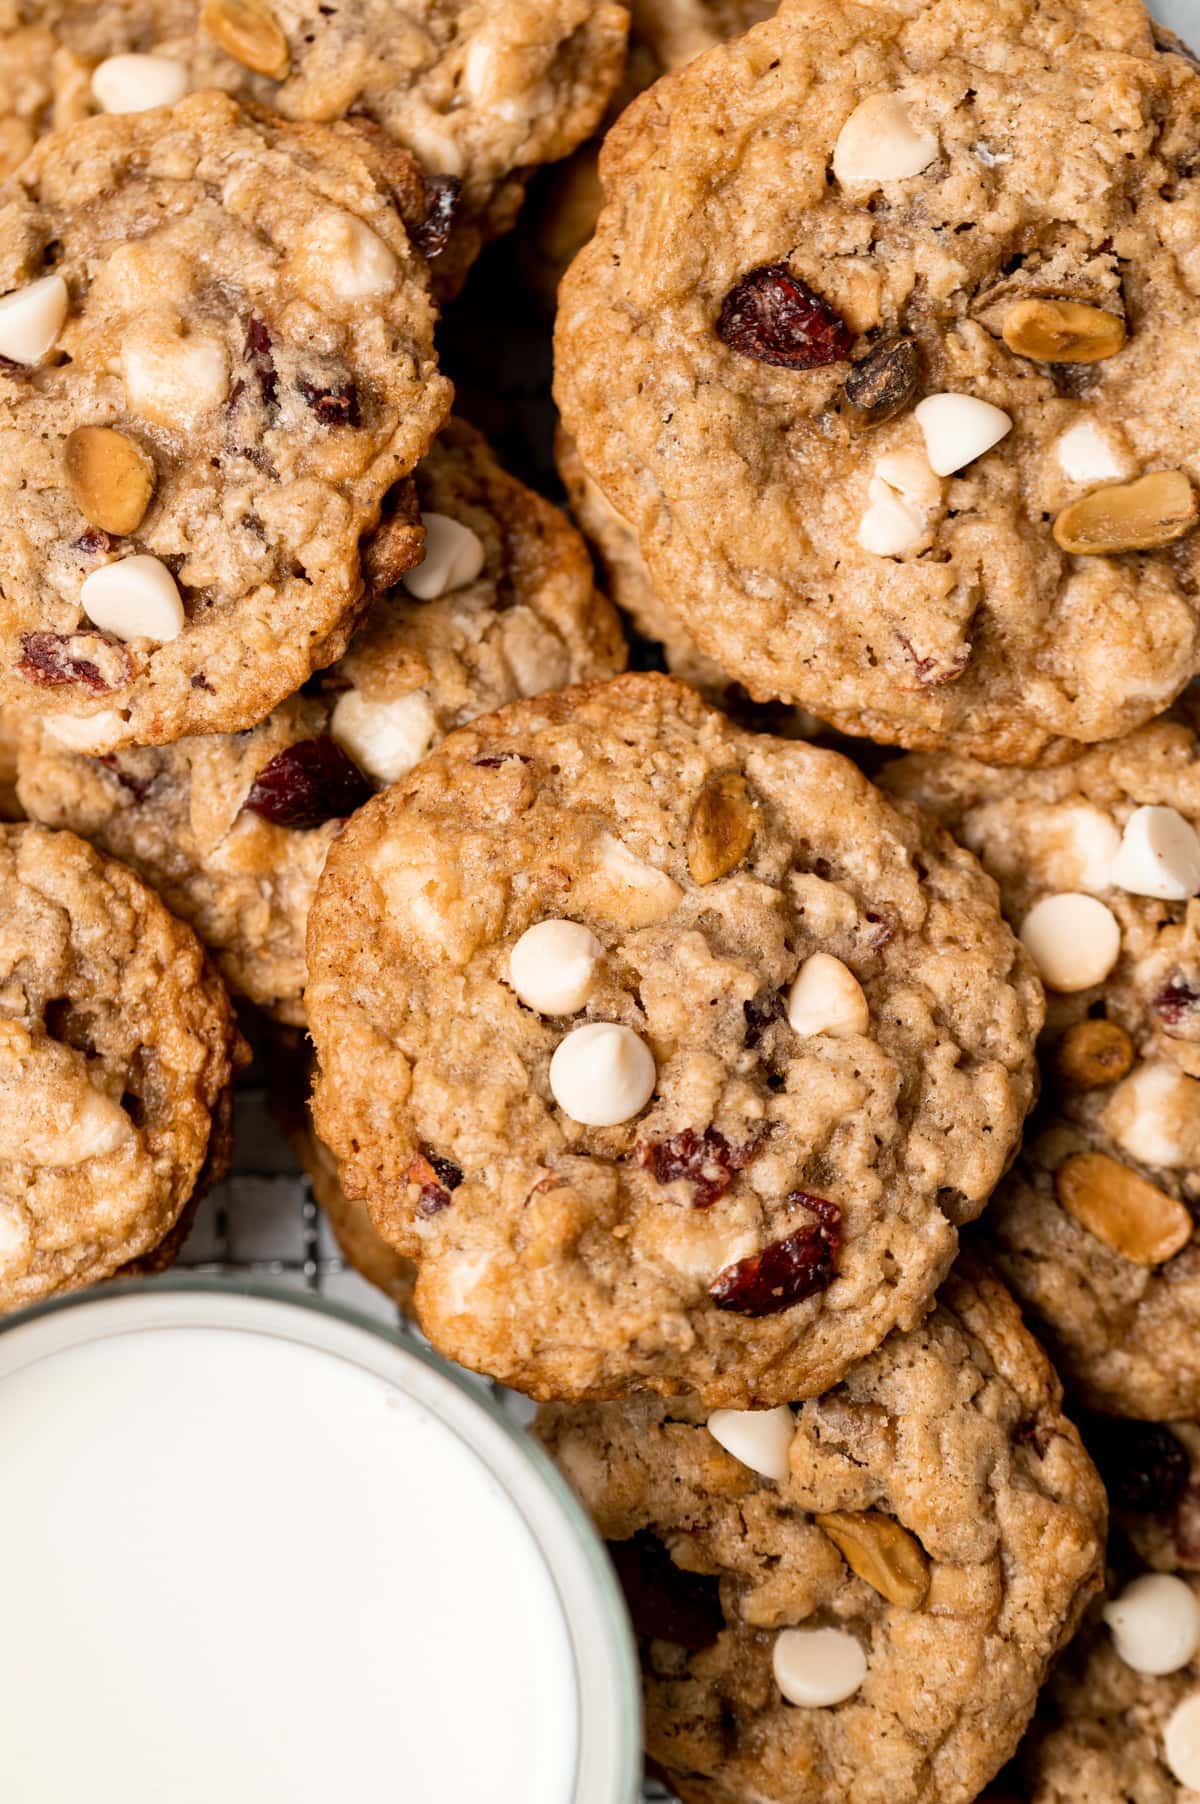 pile of oatmeal cookies with cranberries white chocolate chips and pistachios glass of milk